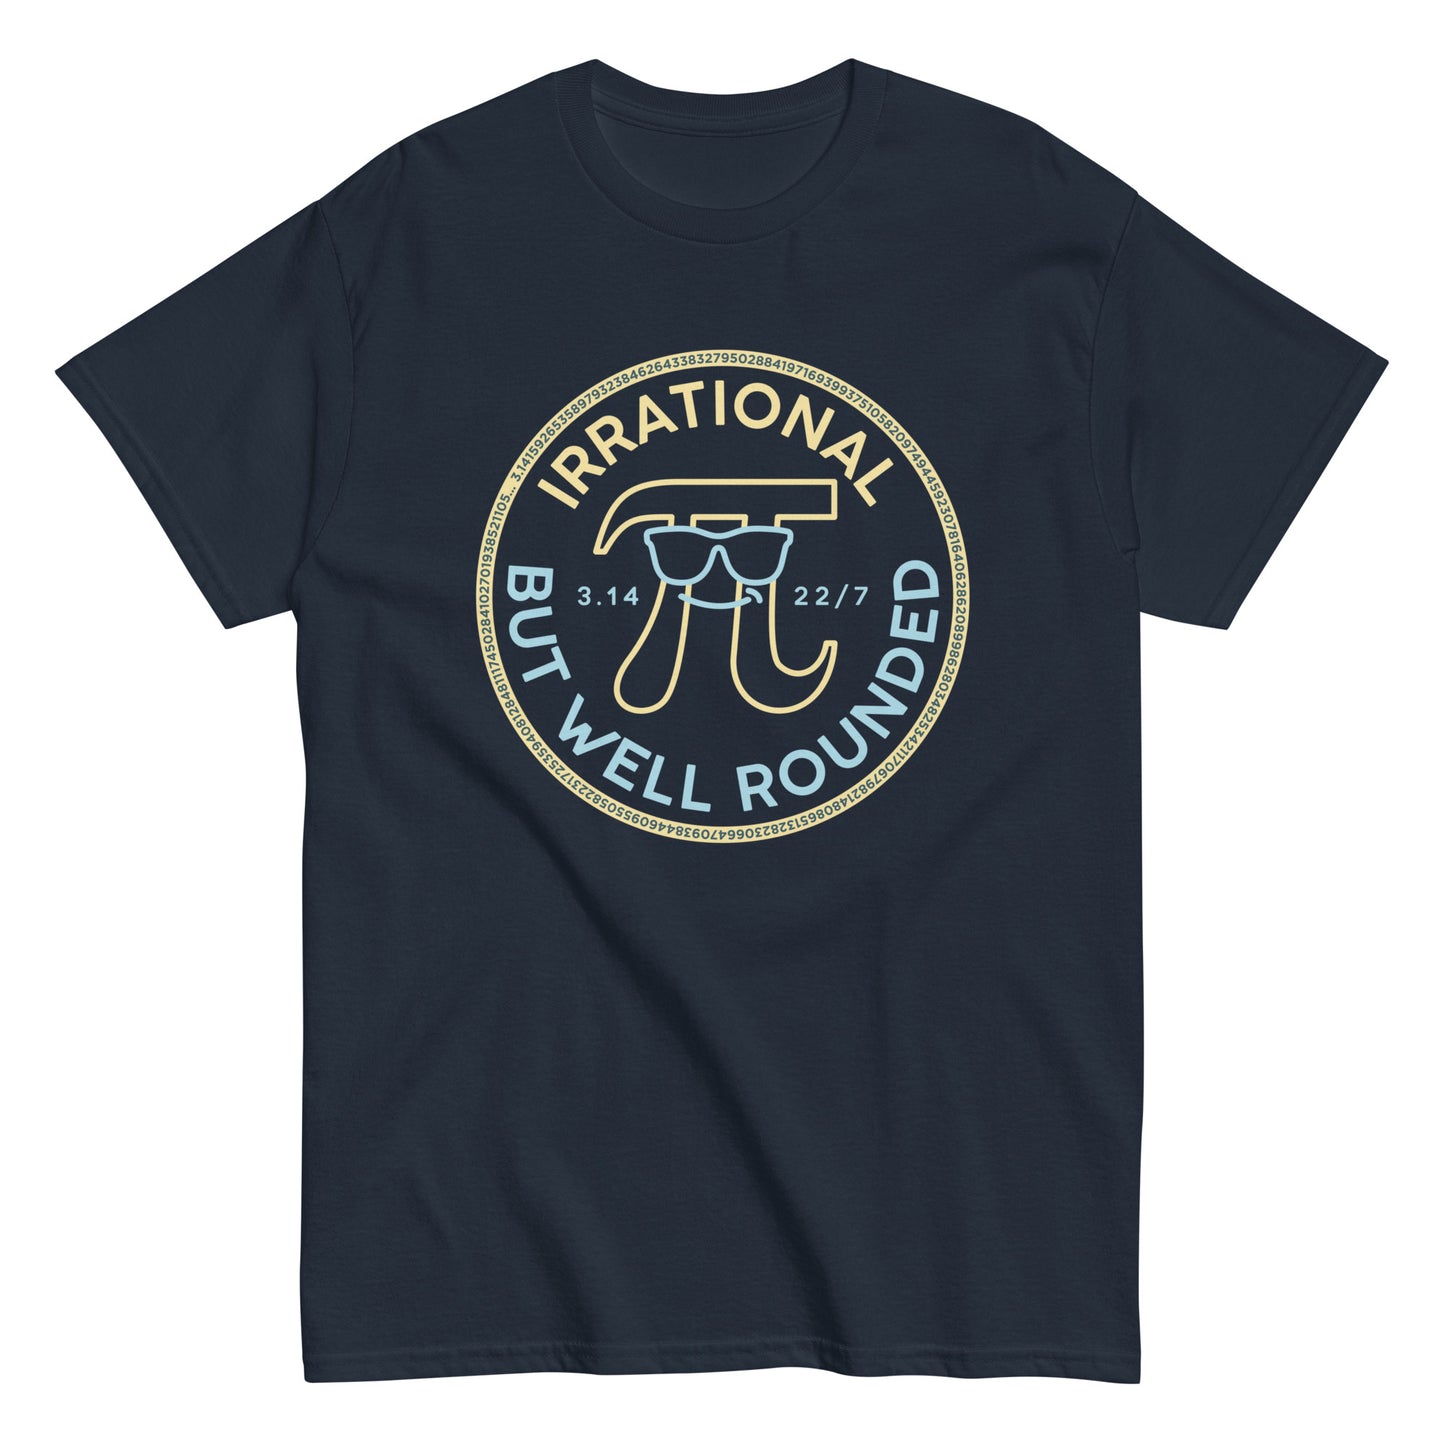 Irrational But Well Rounded Men's Classic Tee